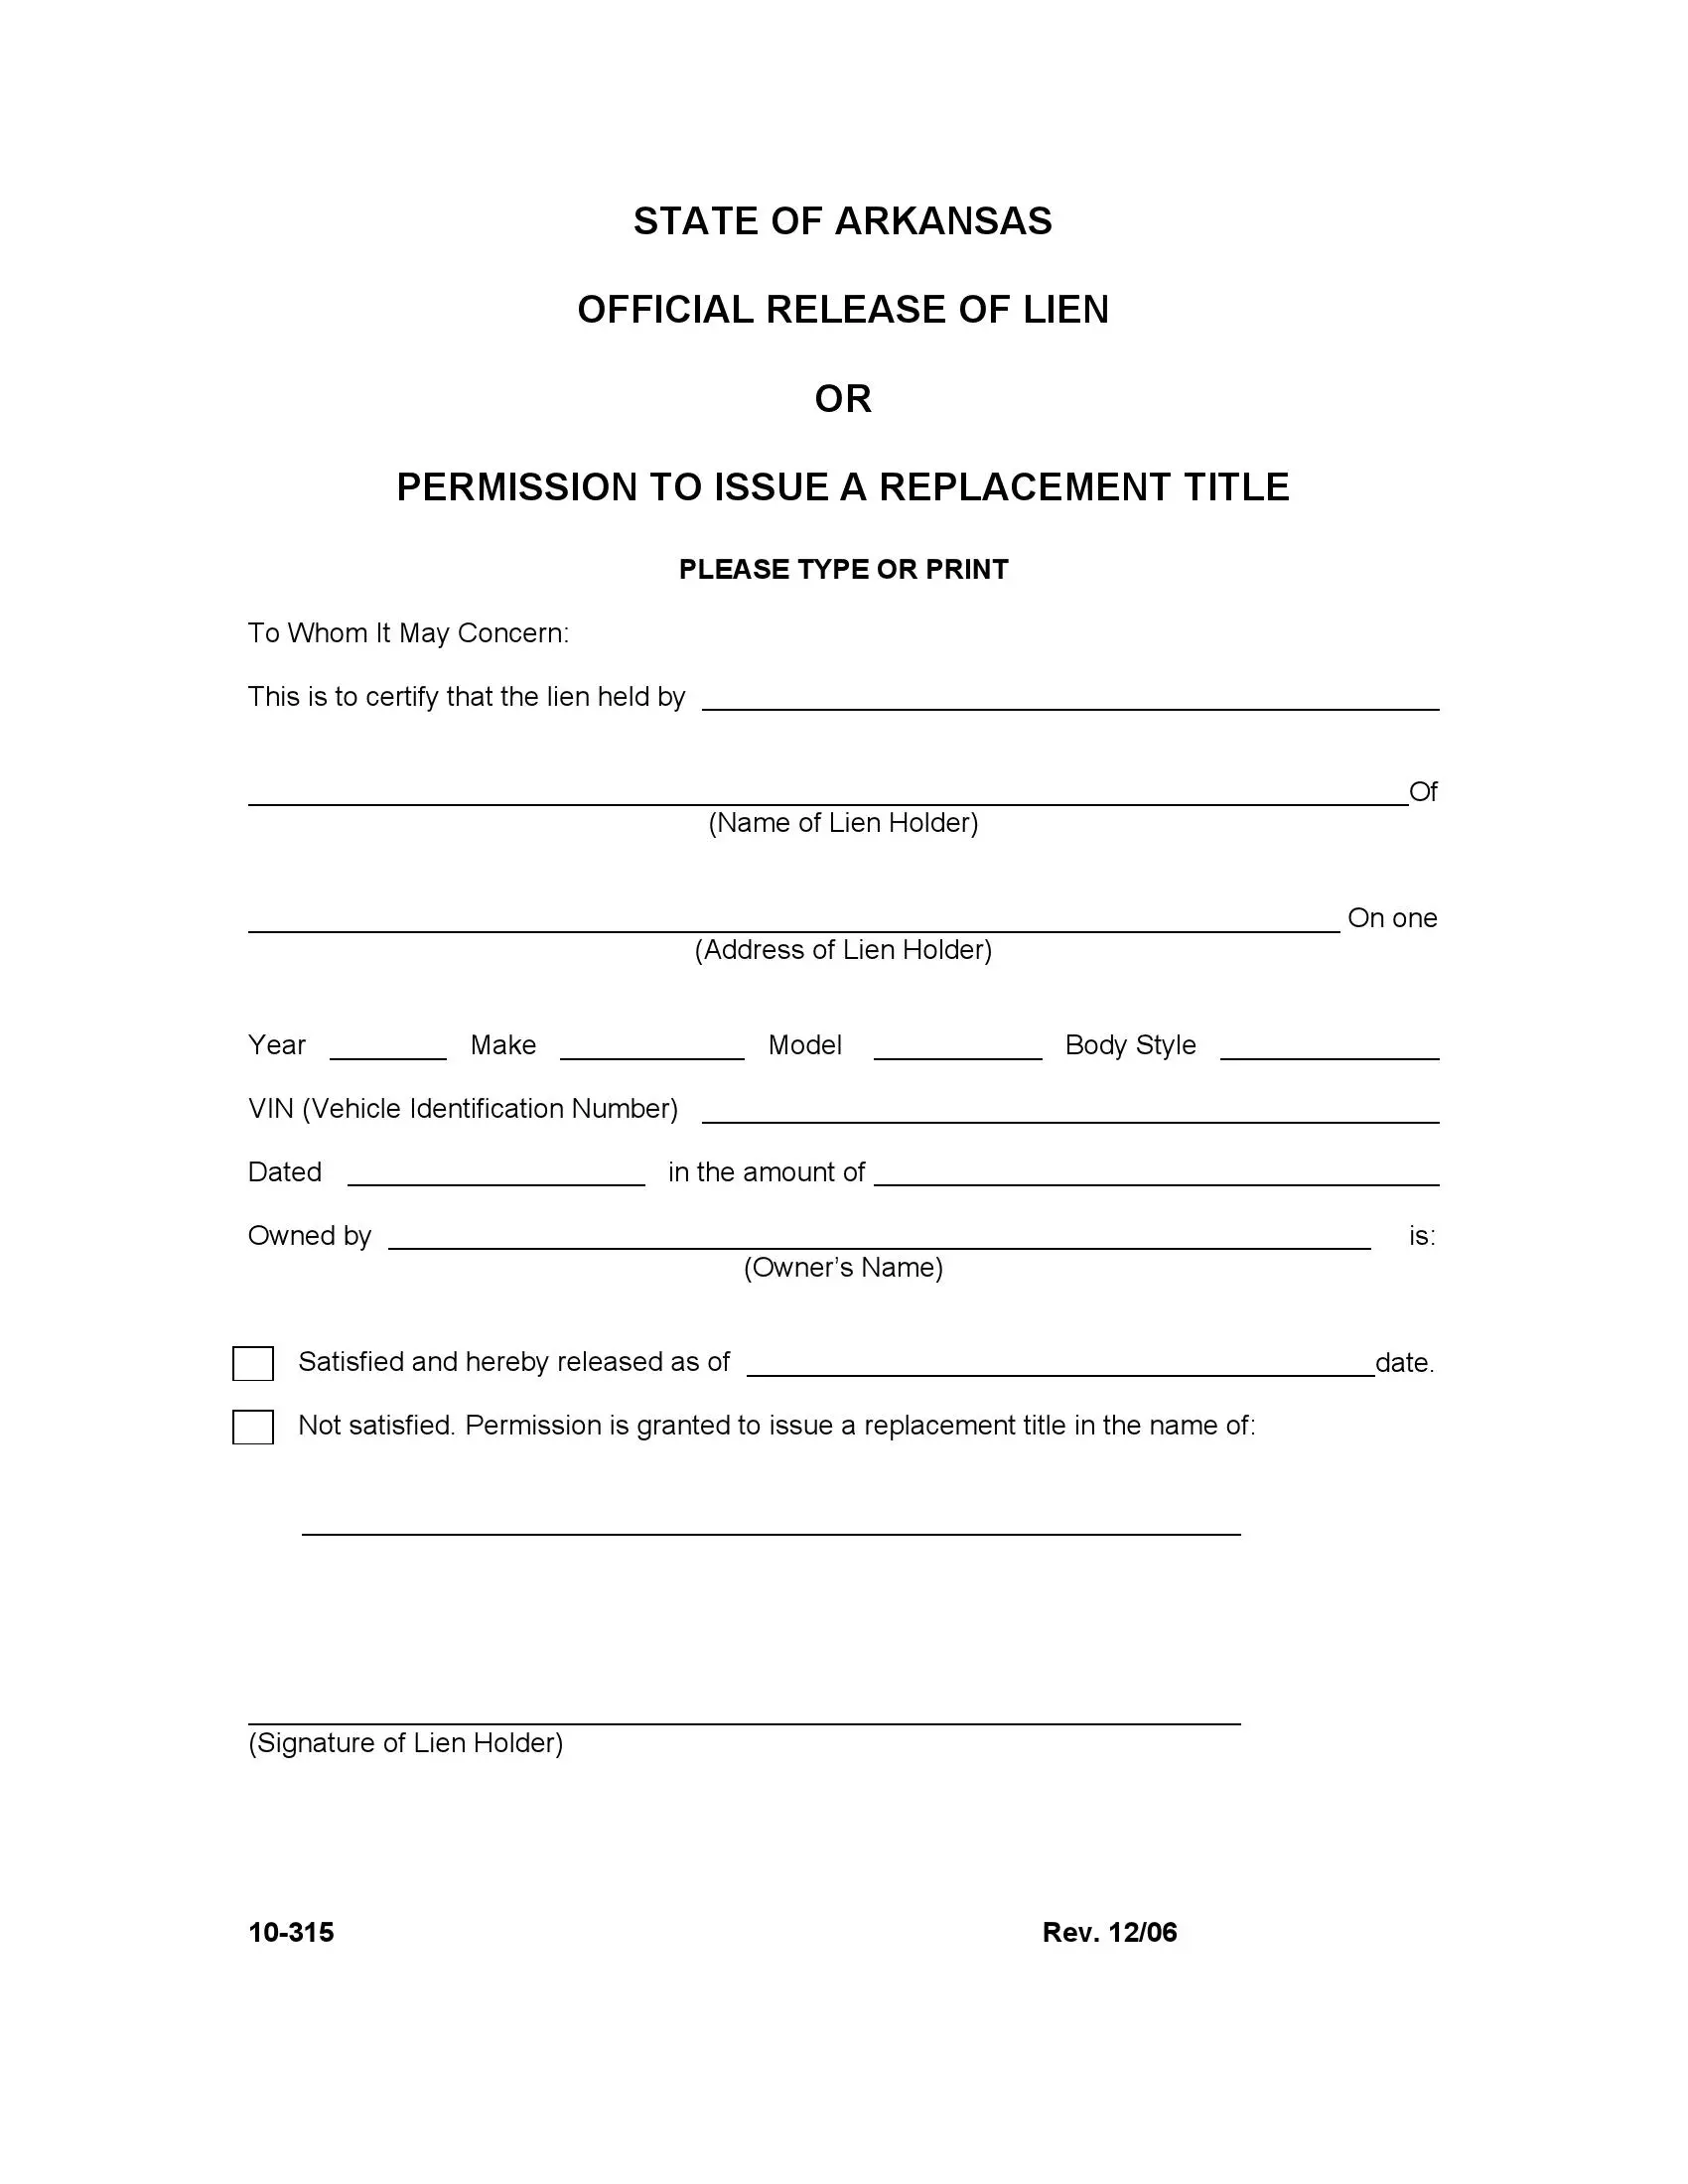 (Boat) Form 10-315